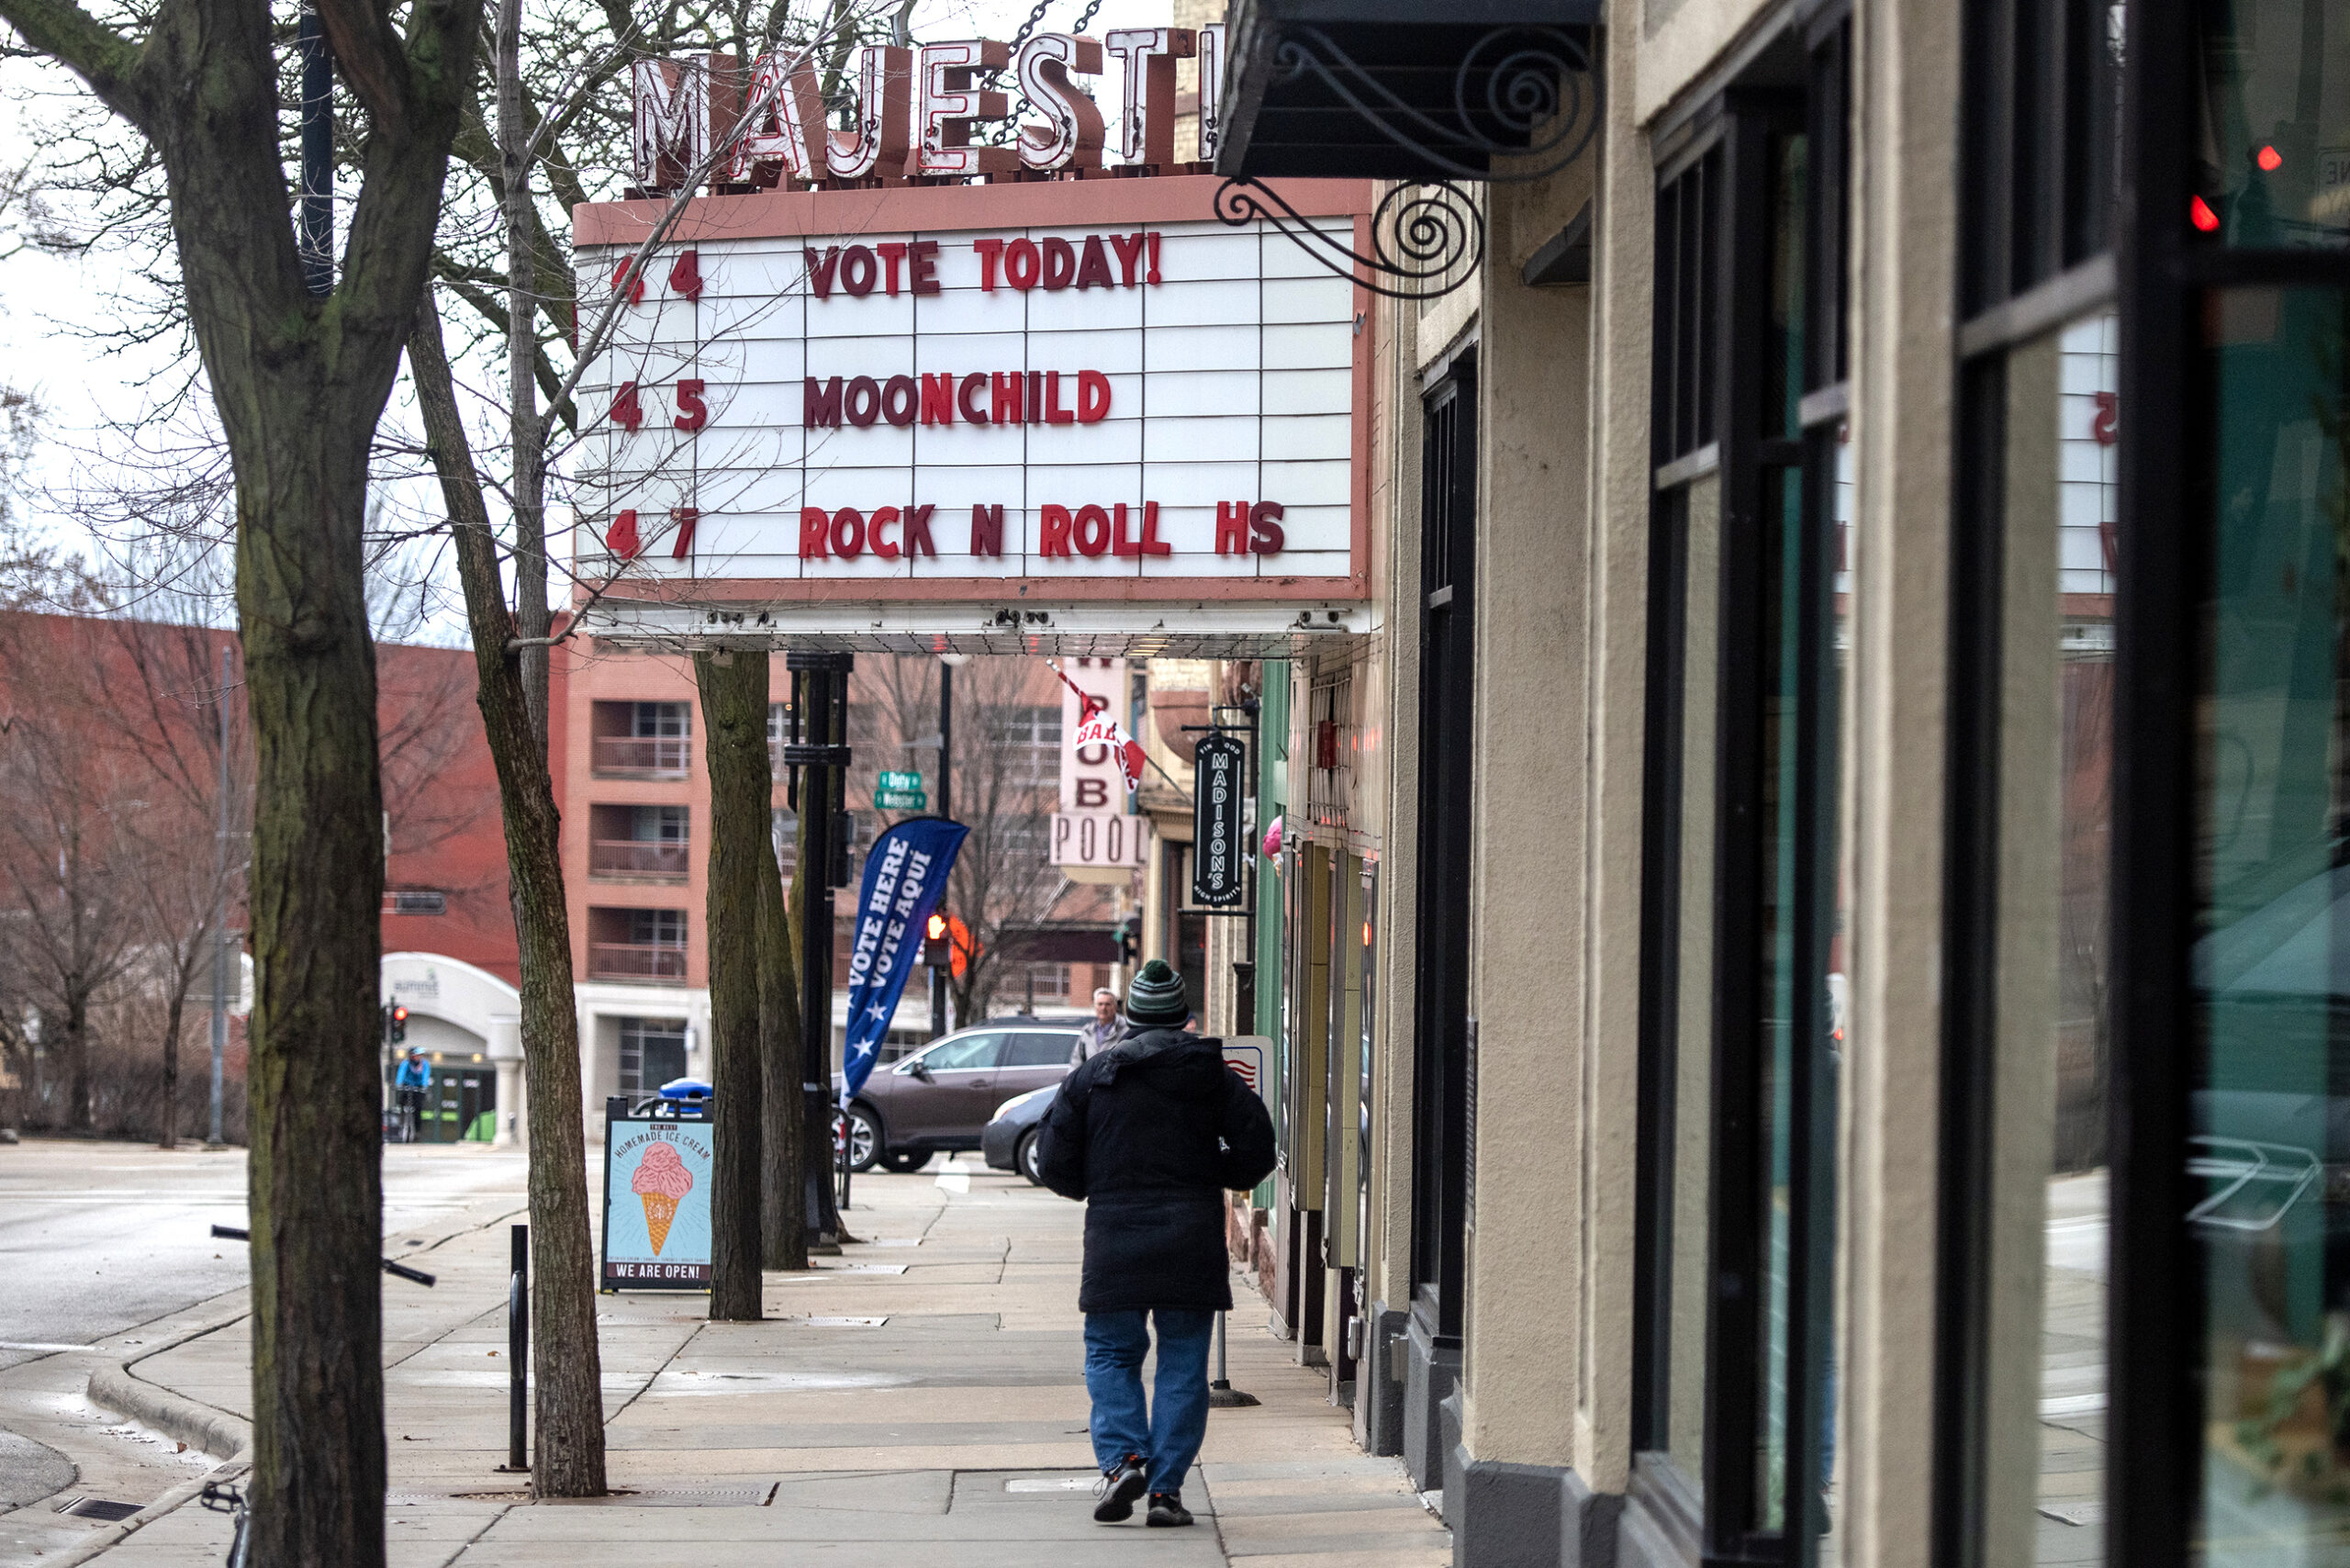 The marquee outside of a theater says "VOTE TODAY!" along with other shows.